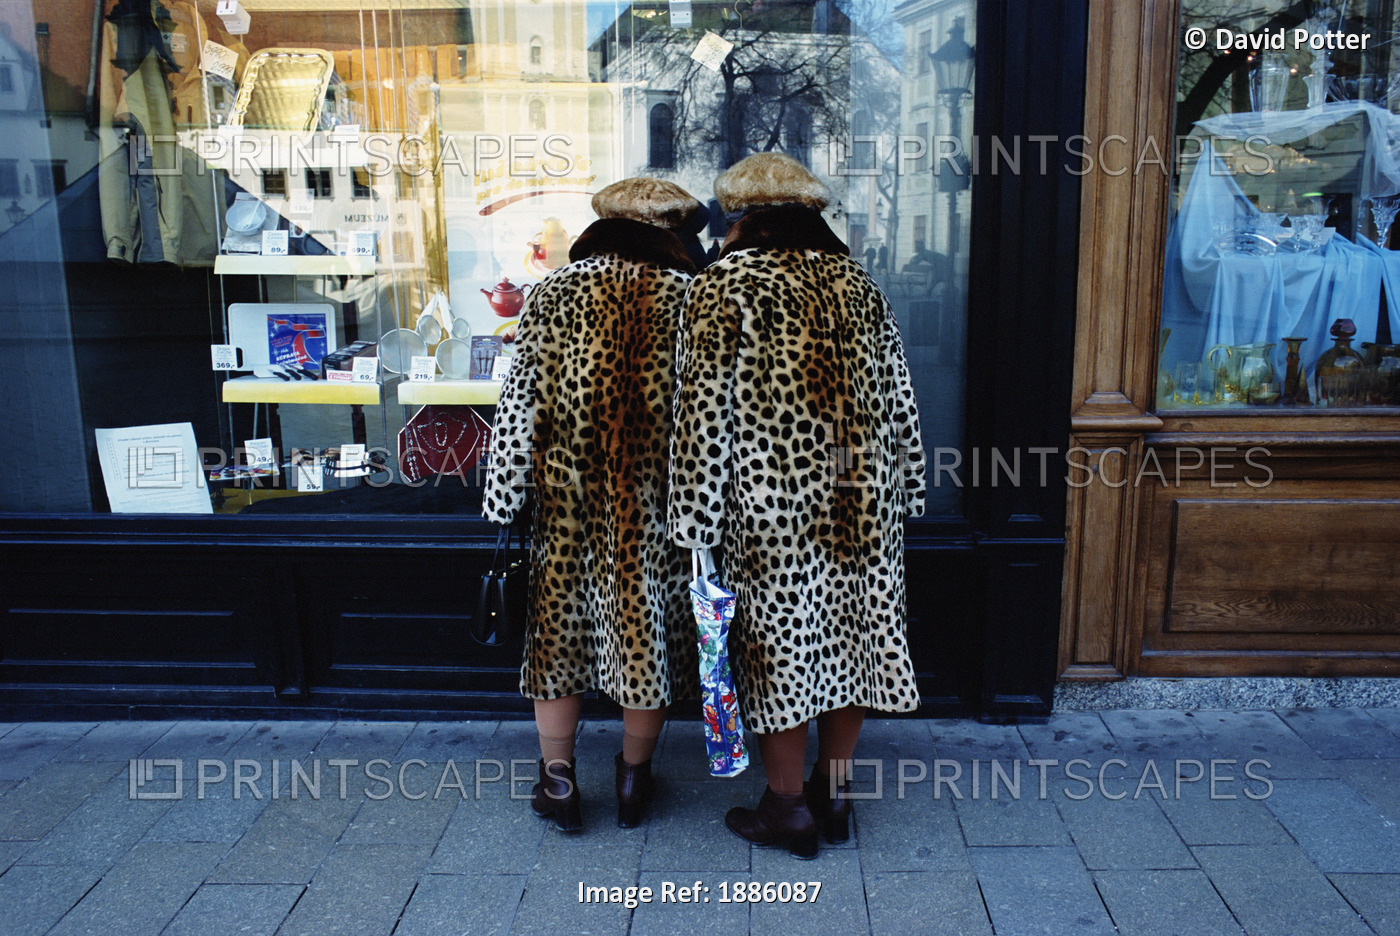 Ladies In Matching Fur Coats Window Shopping In The Old Town